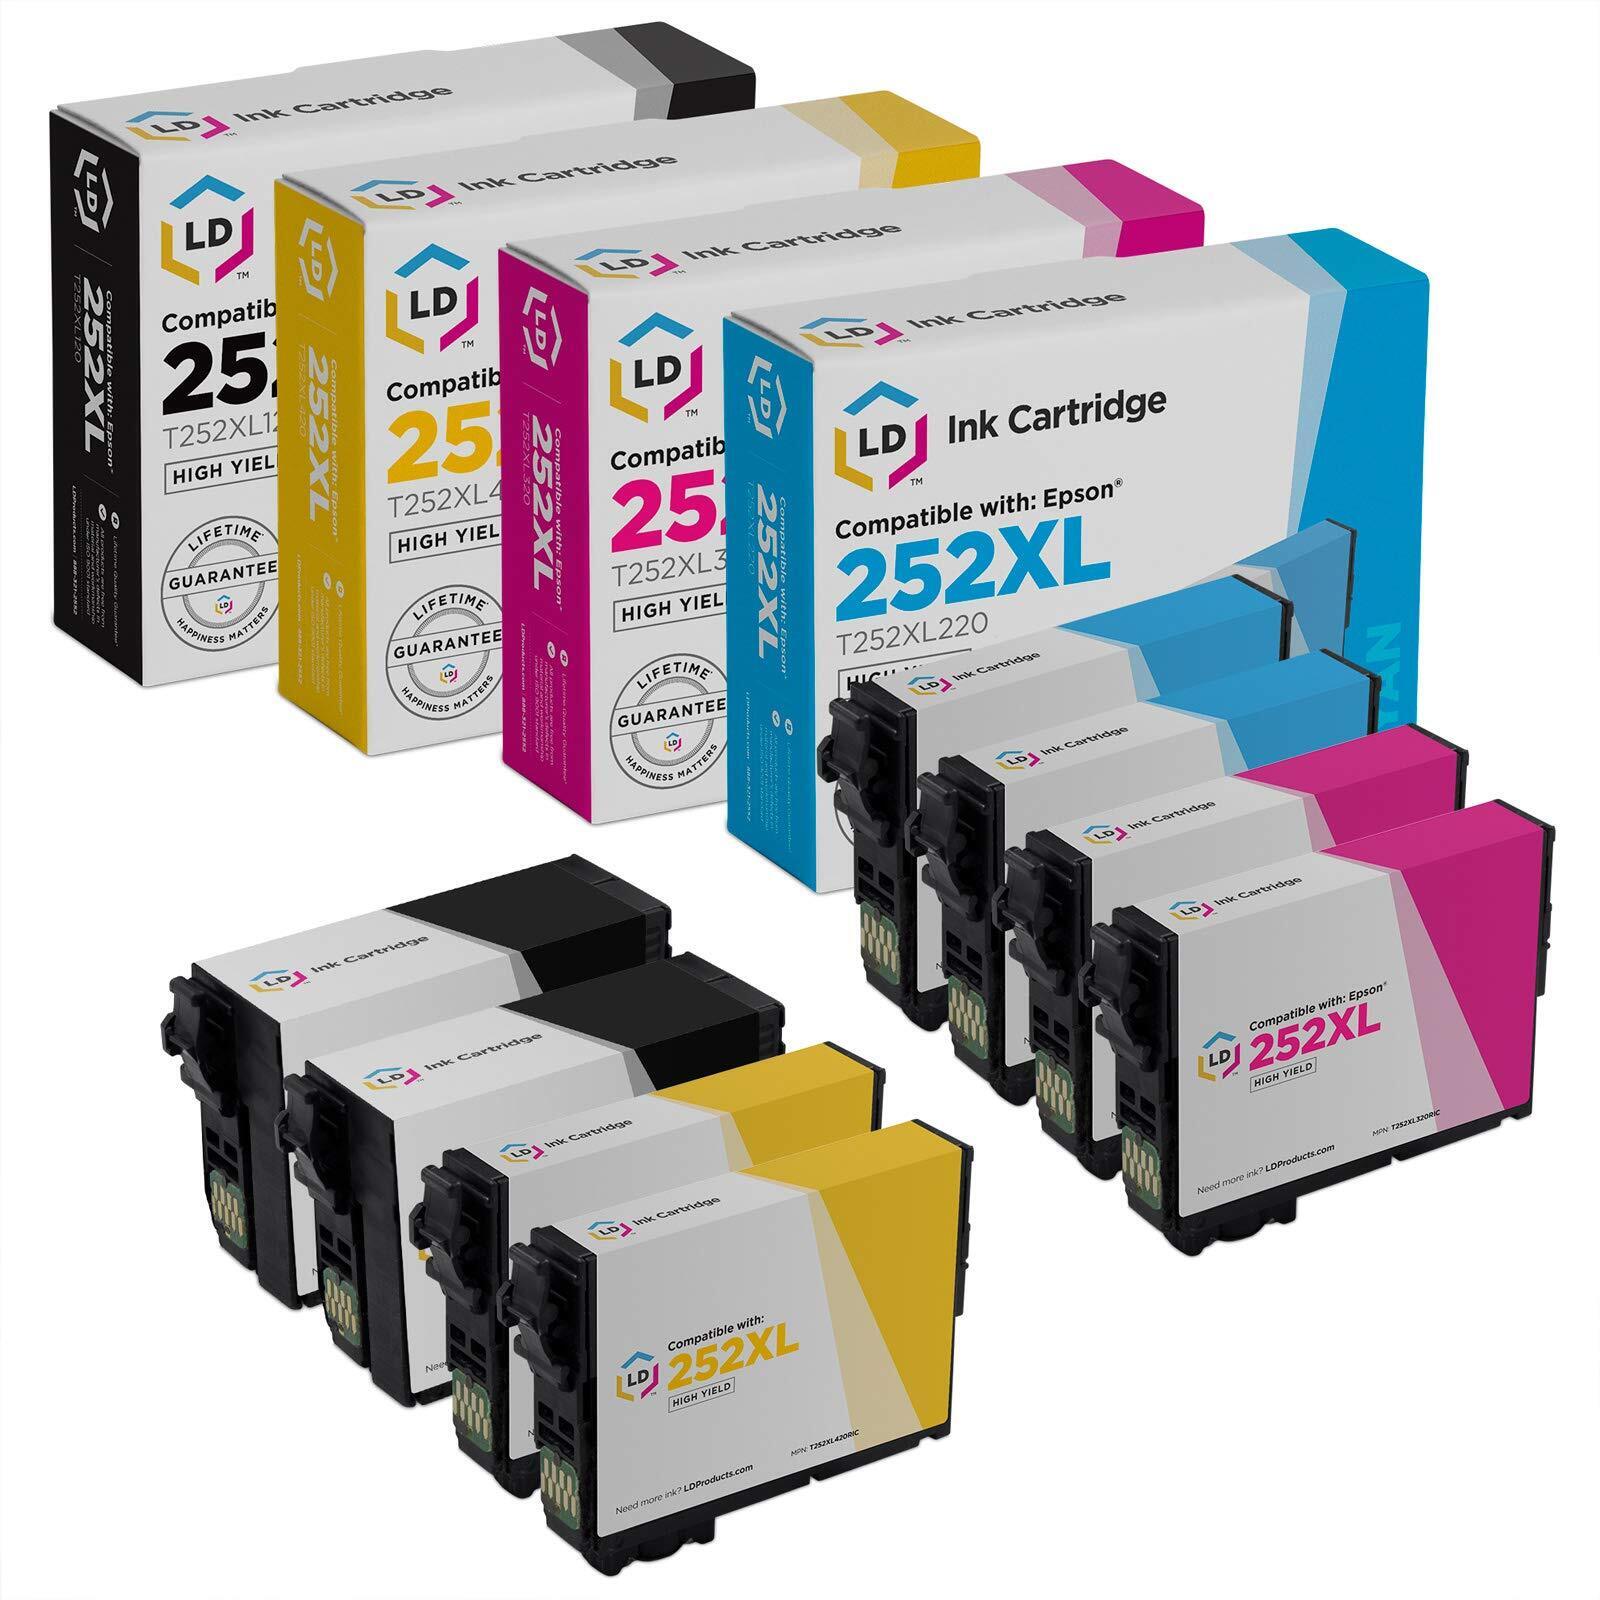 LD Products Replacements for Epson 252XL Ink Cartridges HY Color 8-Pack Bundle